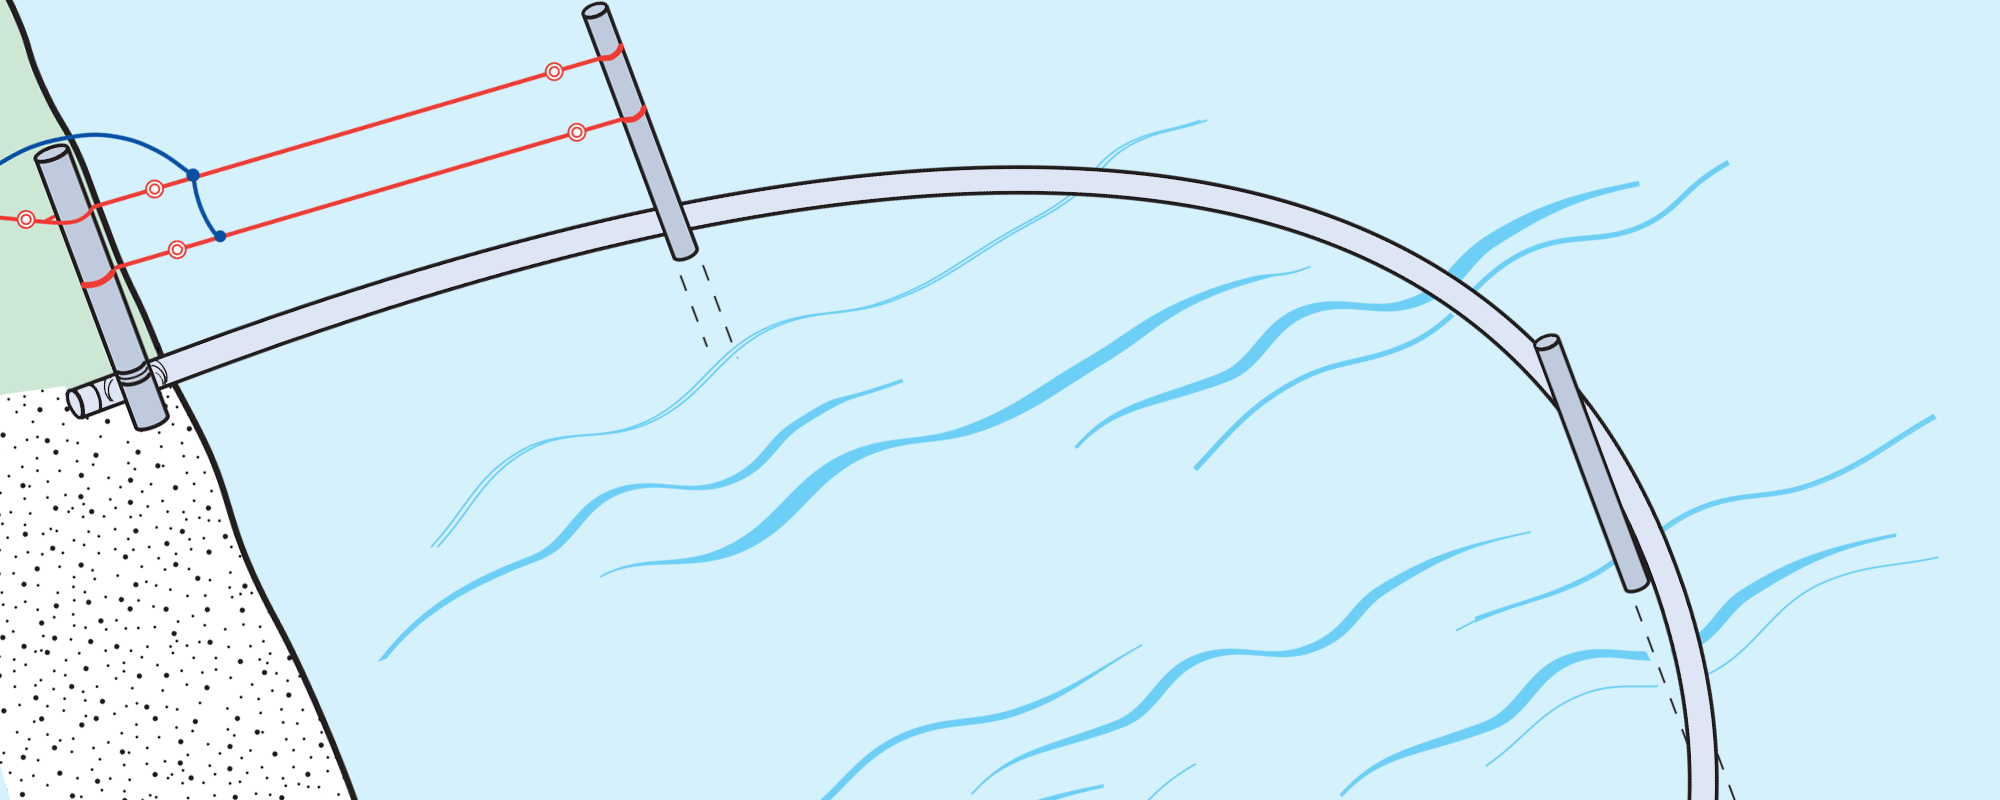 Floating Polyethylene Pipe for Livestock Water Access at a Fenced Pond